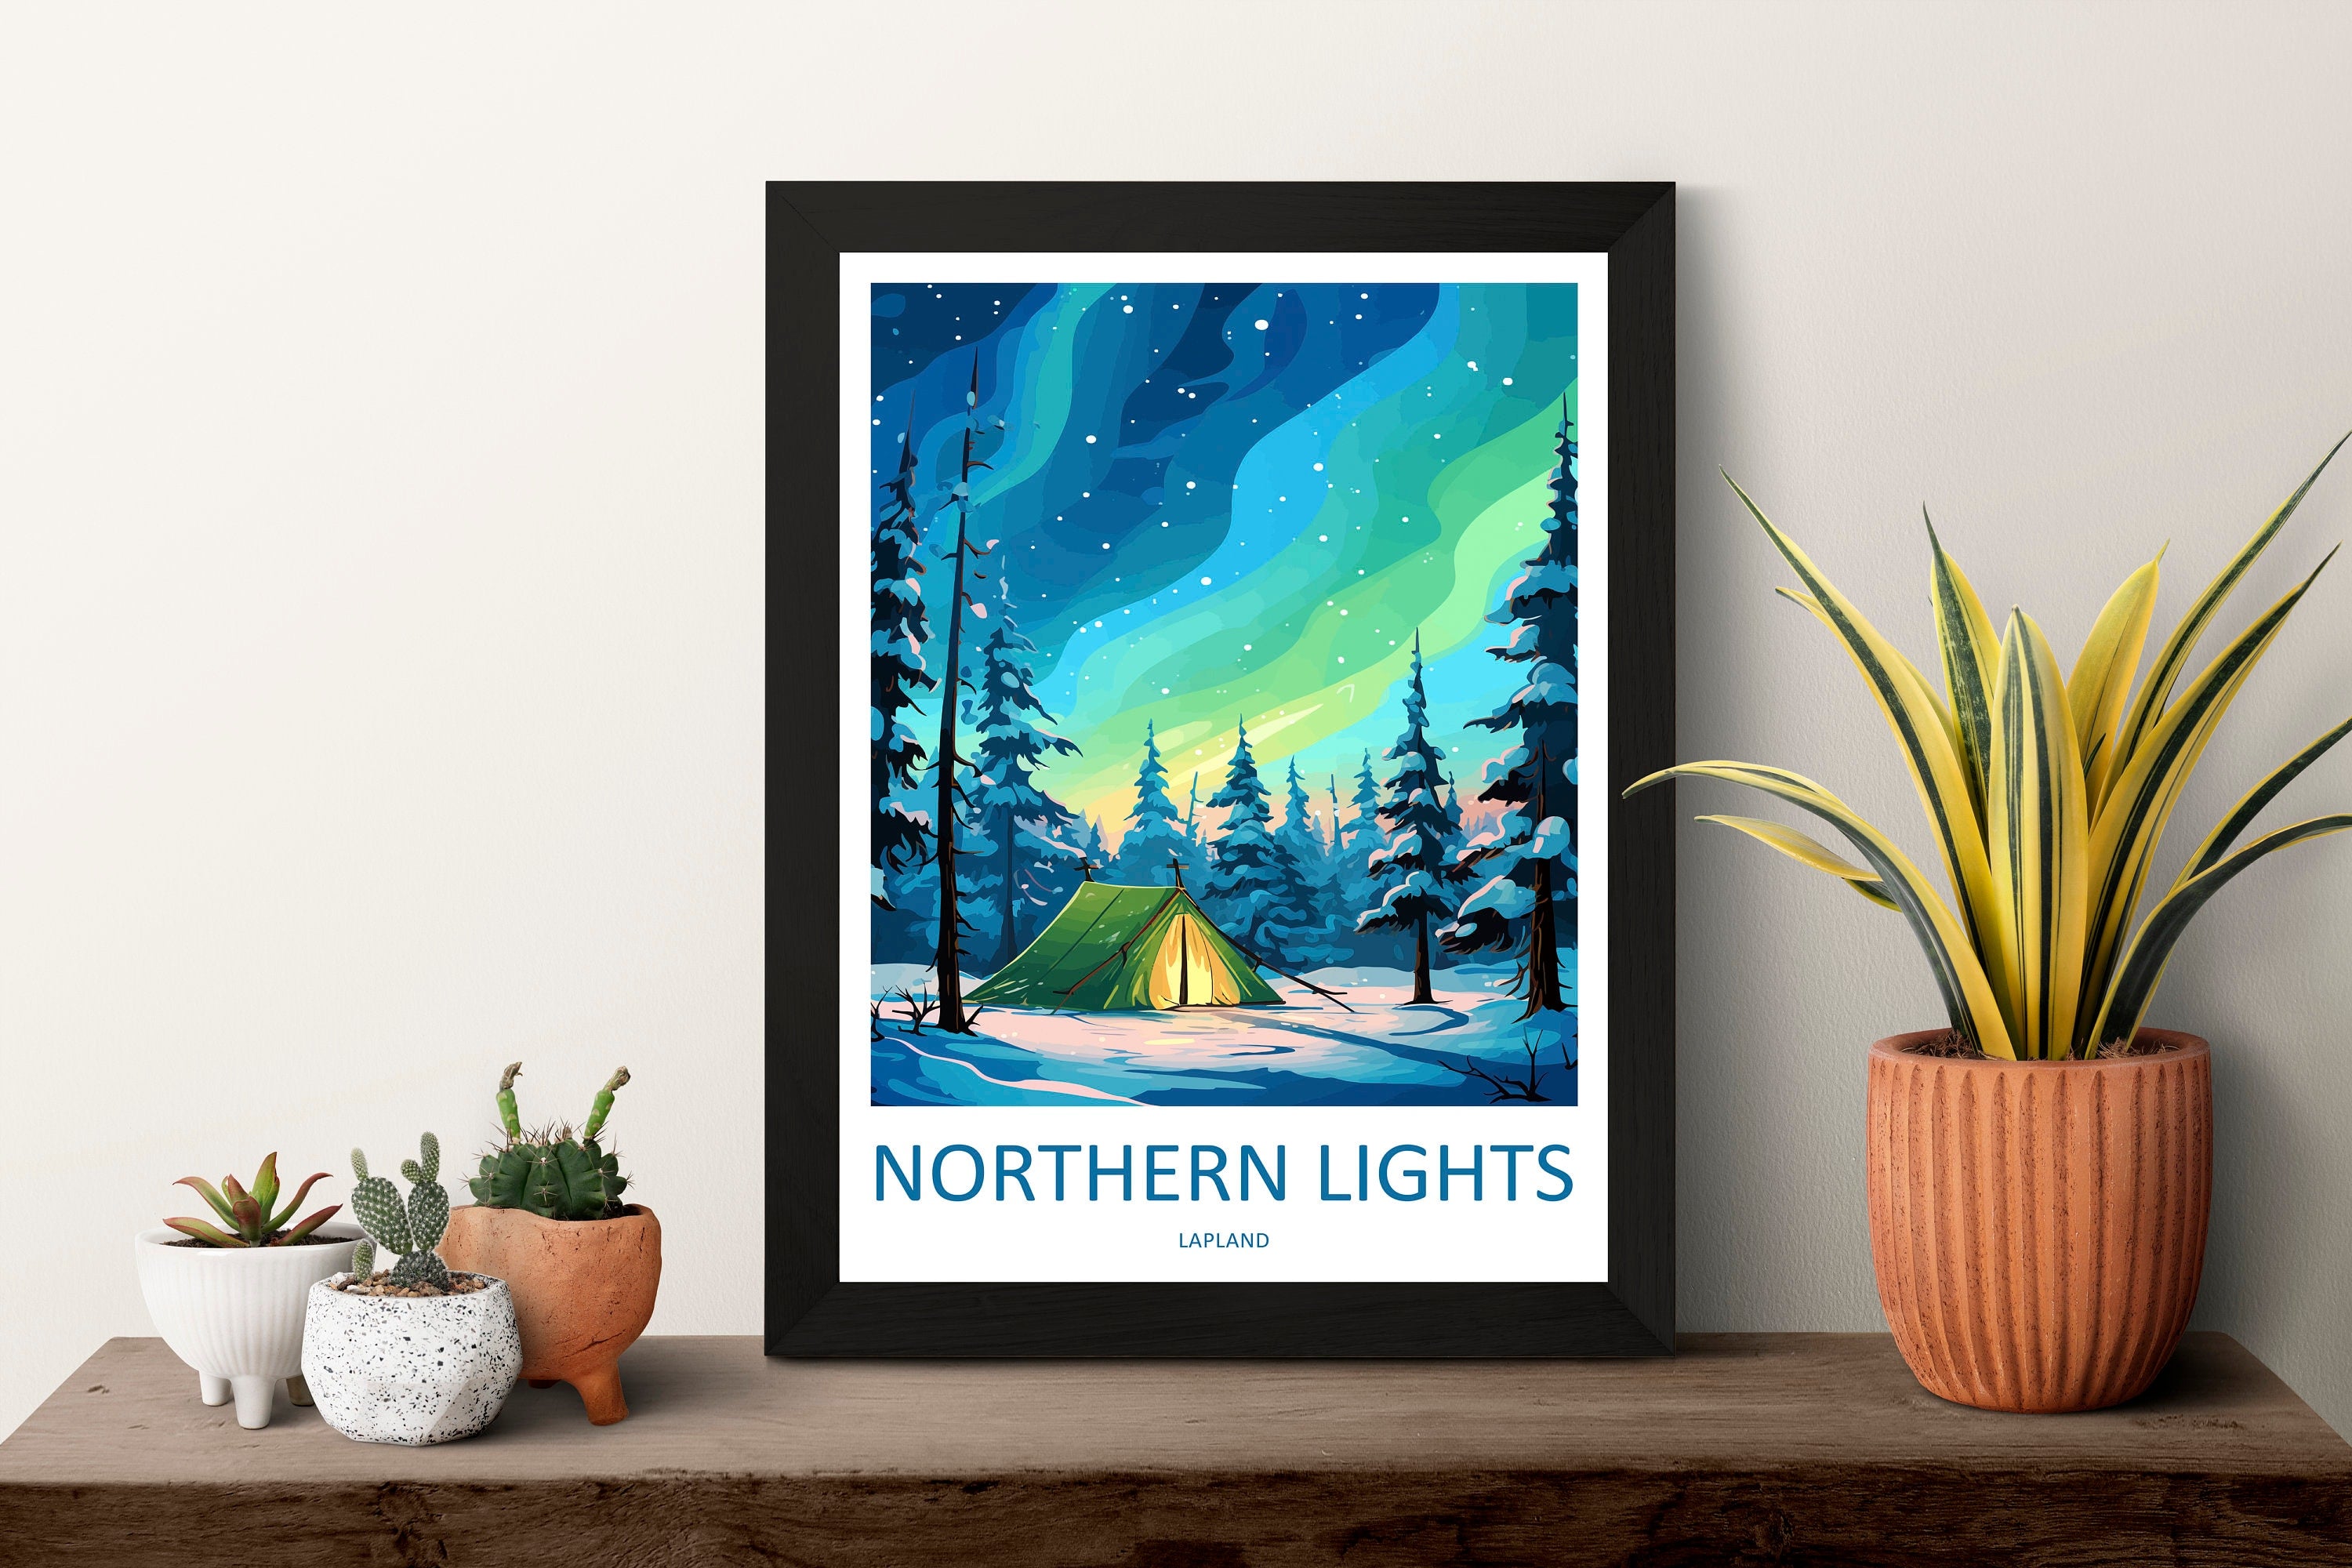 Lapland Travel Print Lapland Home Décor Northern Lights Island Art Print Lapland Wall Print For Finland Gift Wall Hanging Lapland Artwork